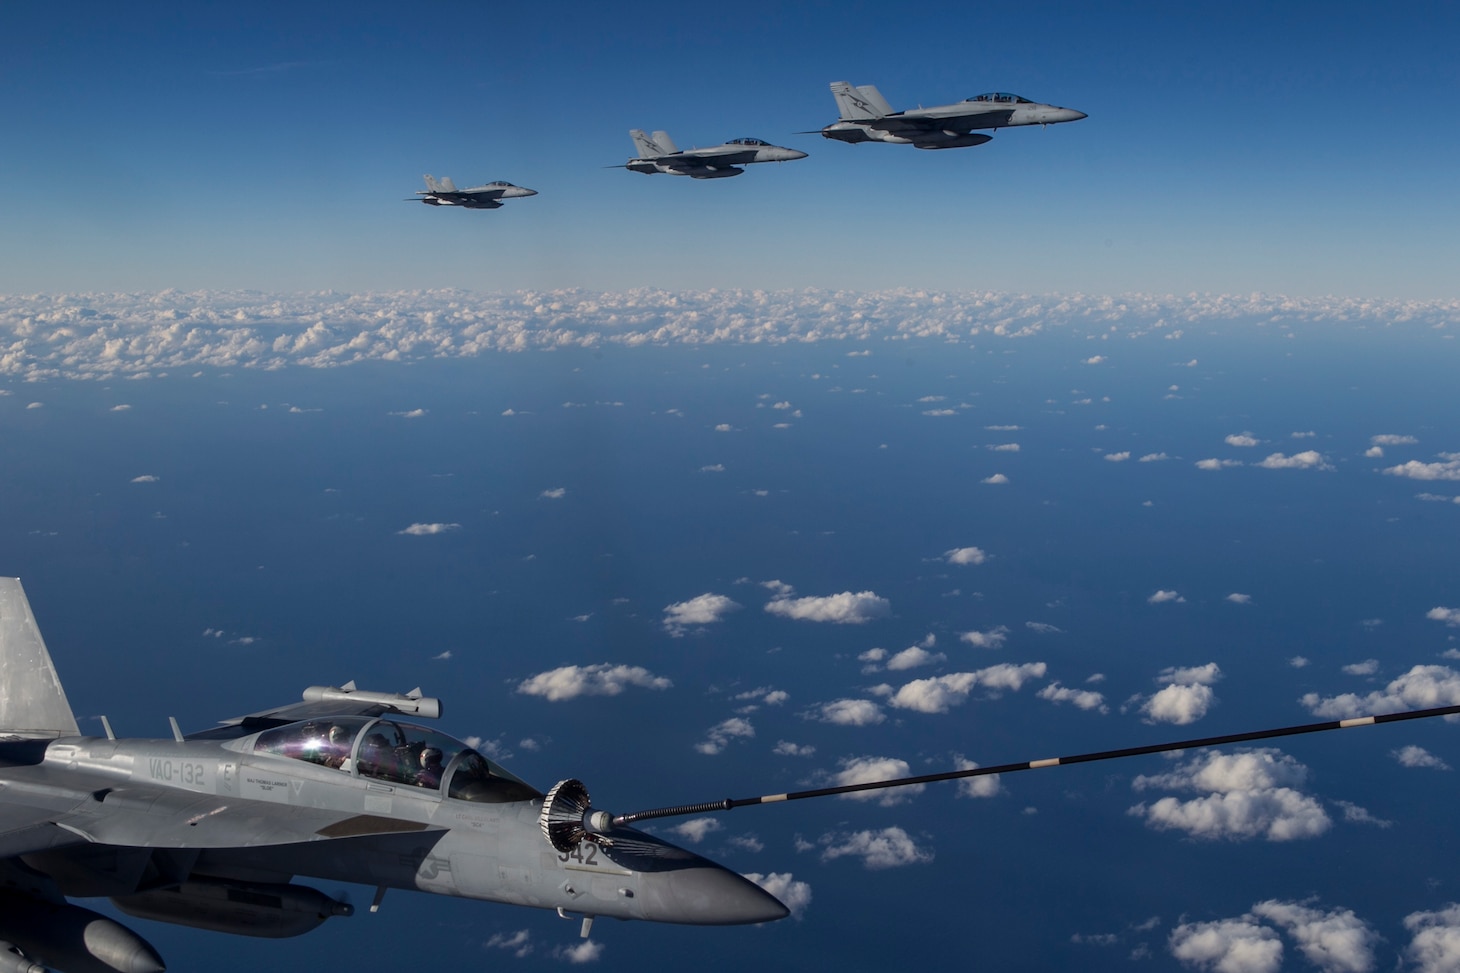 United States Navy EA-18G Growlers from VAQ-132 "Scorpion" Squadron conducts Air to Air refuelling operations with an RAAF KC-30 Multi Role Tanker Transport aircraft from No 33 Squadron. RAAF Base Amberley is the main operating base for RAAF and United States aircraft activities during Talisman Saber 2017. (Royal Australian Air Force photo by Sgt. Peter Borys)